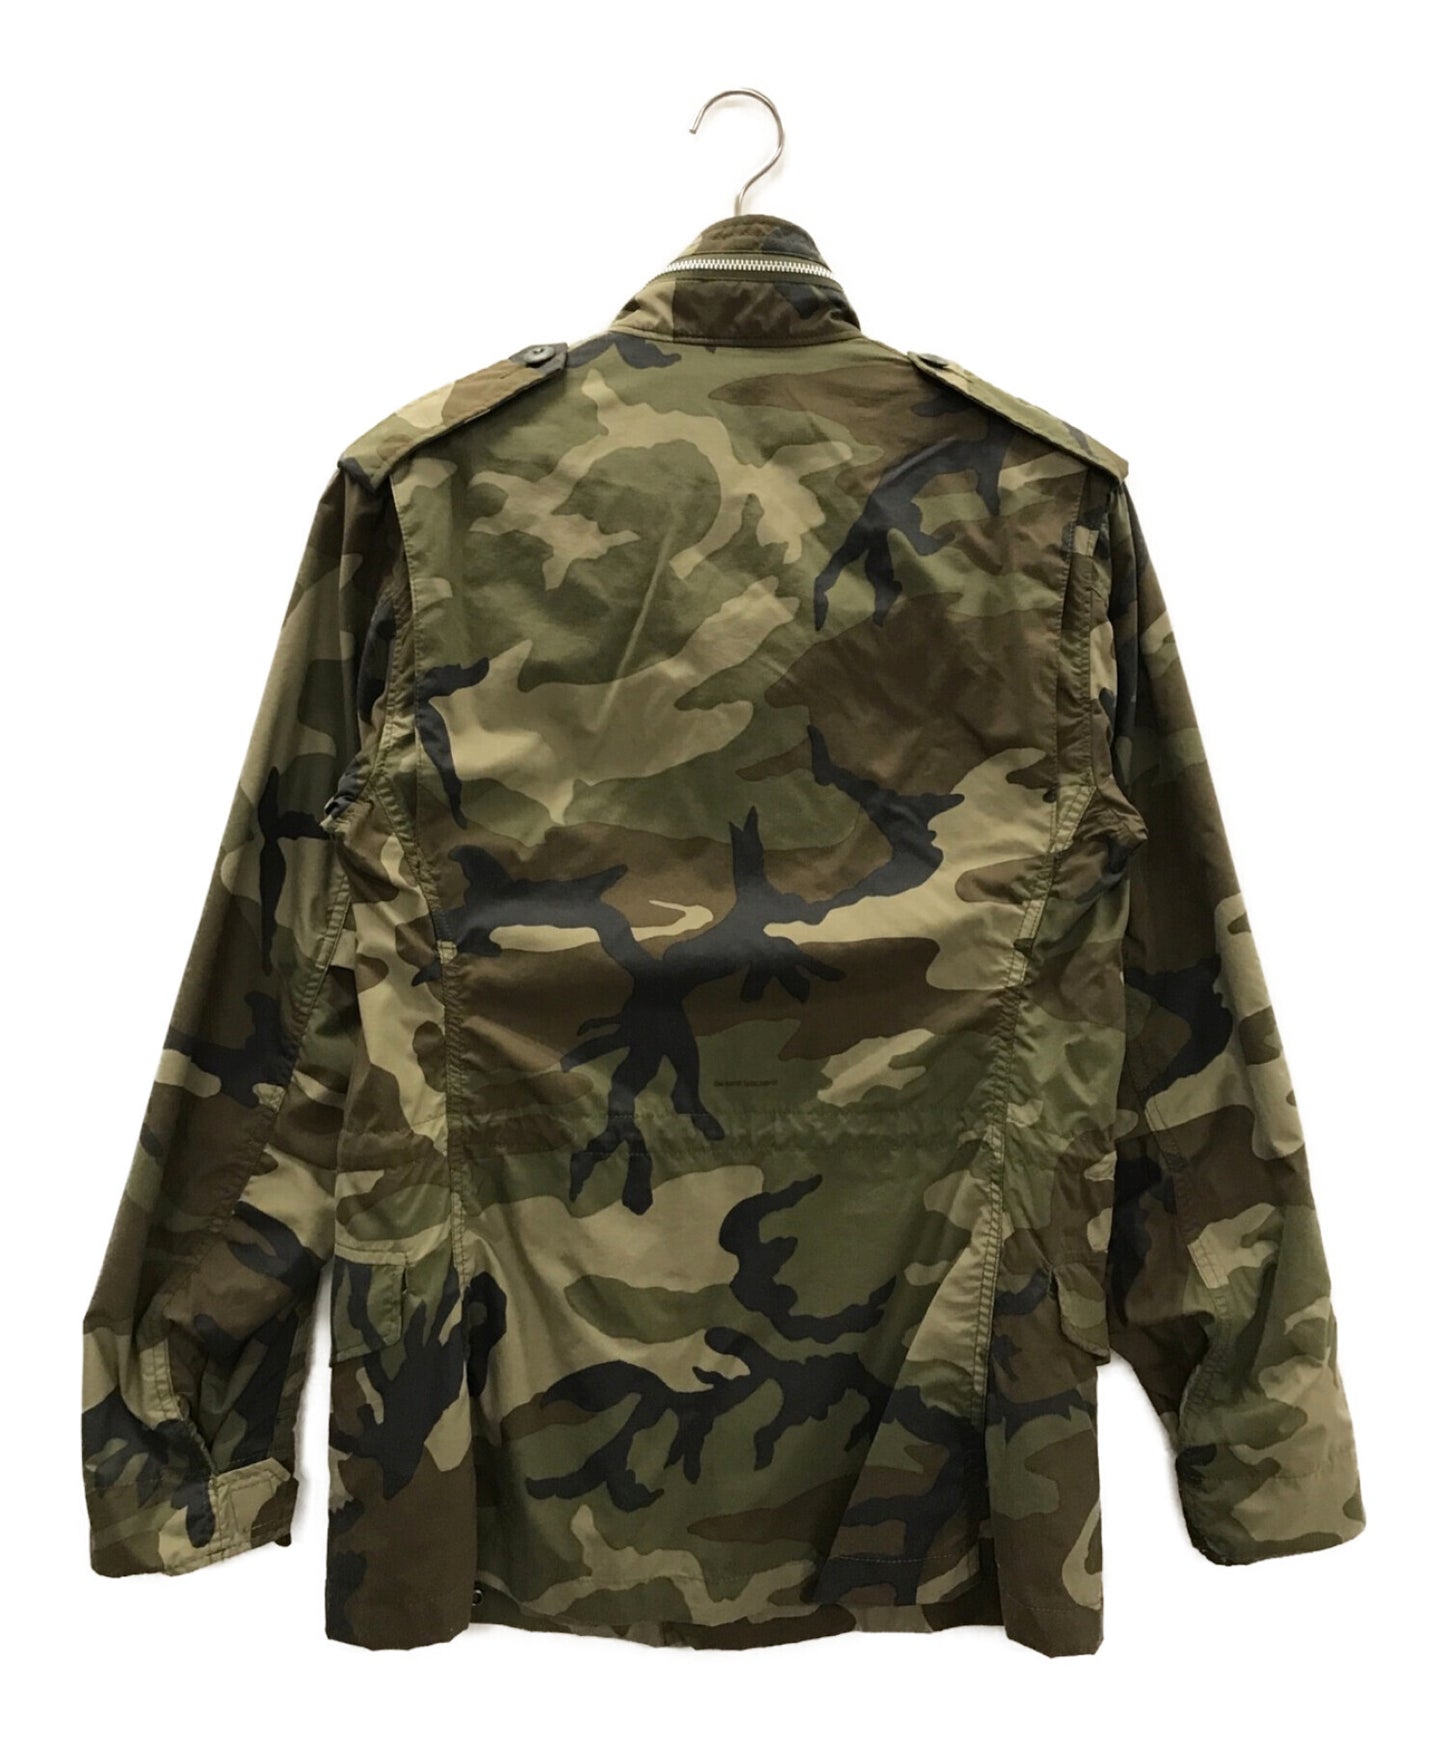 Eye Comme des garcons man × The North Face Camouflage Nylon Jacket OR-J202